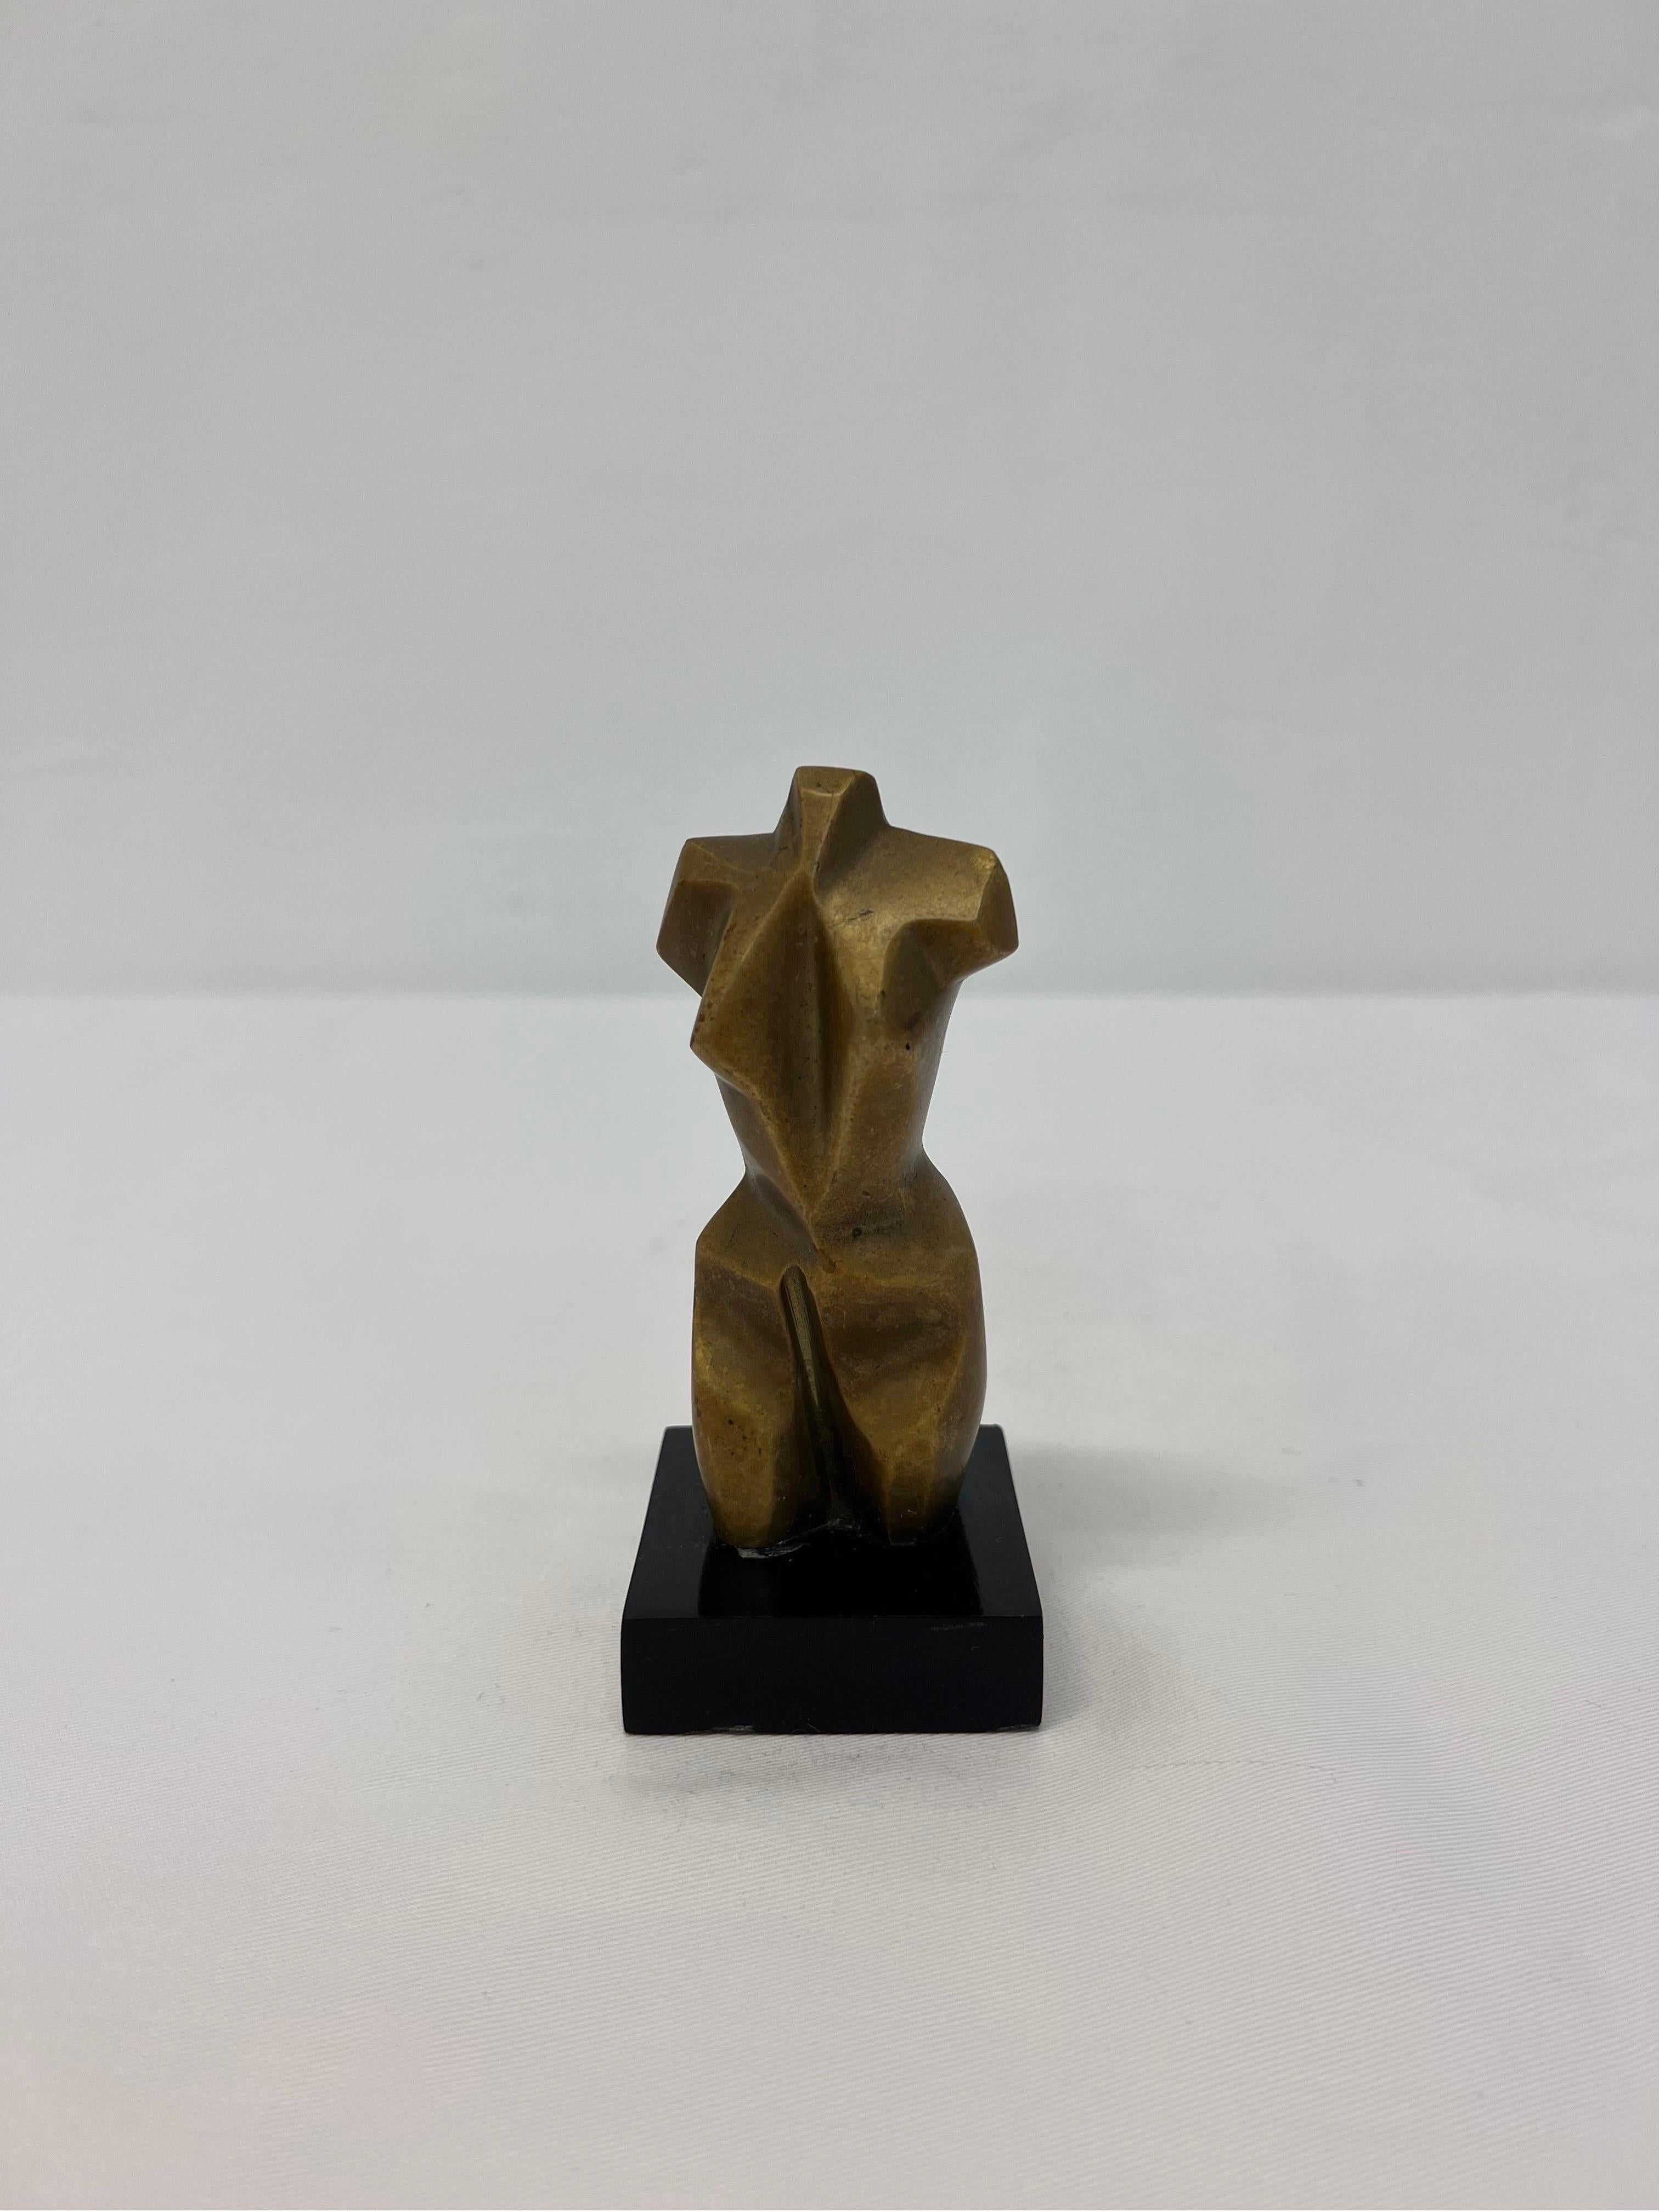 Patinated bronze female torso sculpture on black marble base by Brazilian artist and sculptor Adriana Banfi.